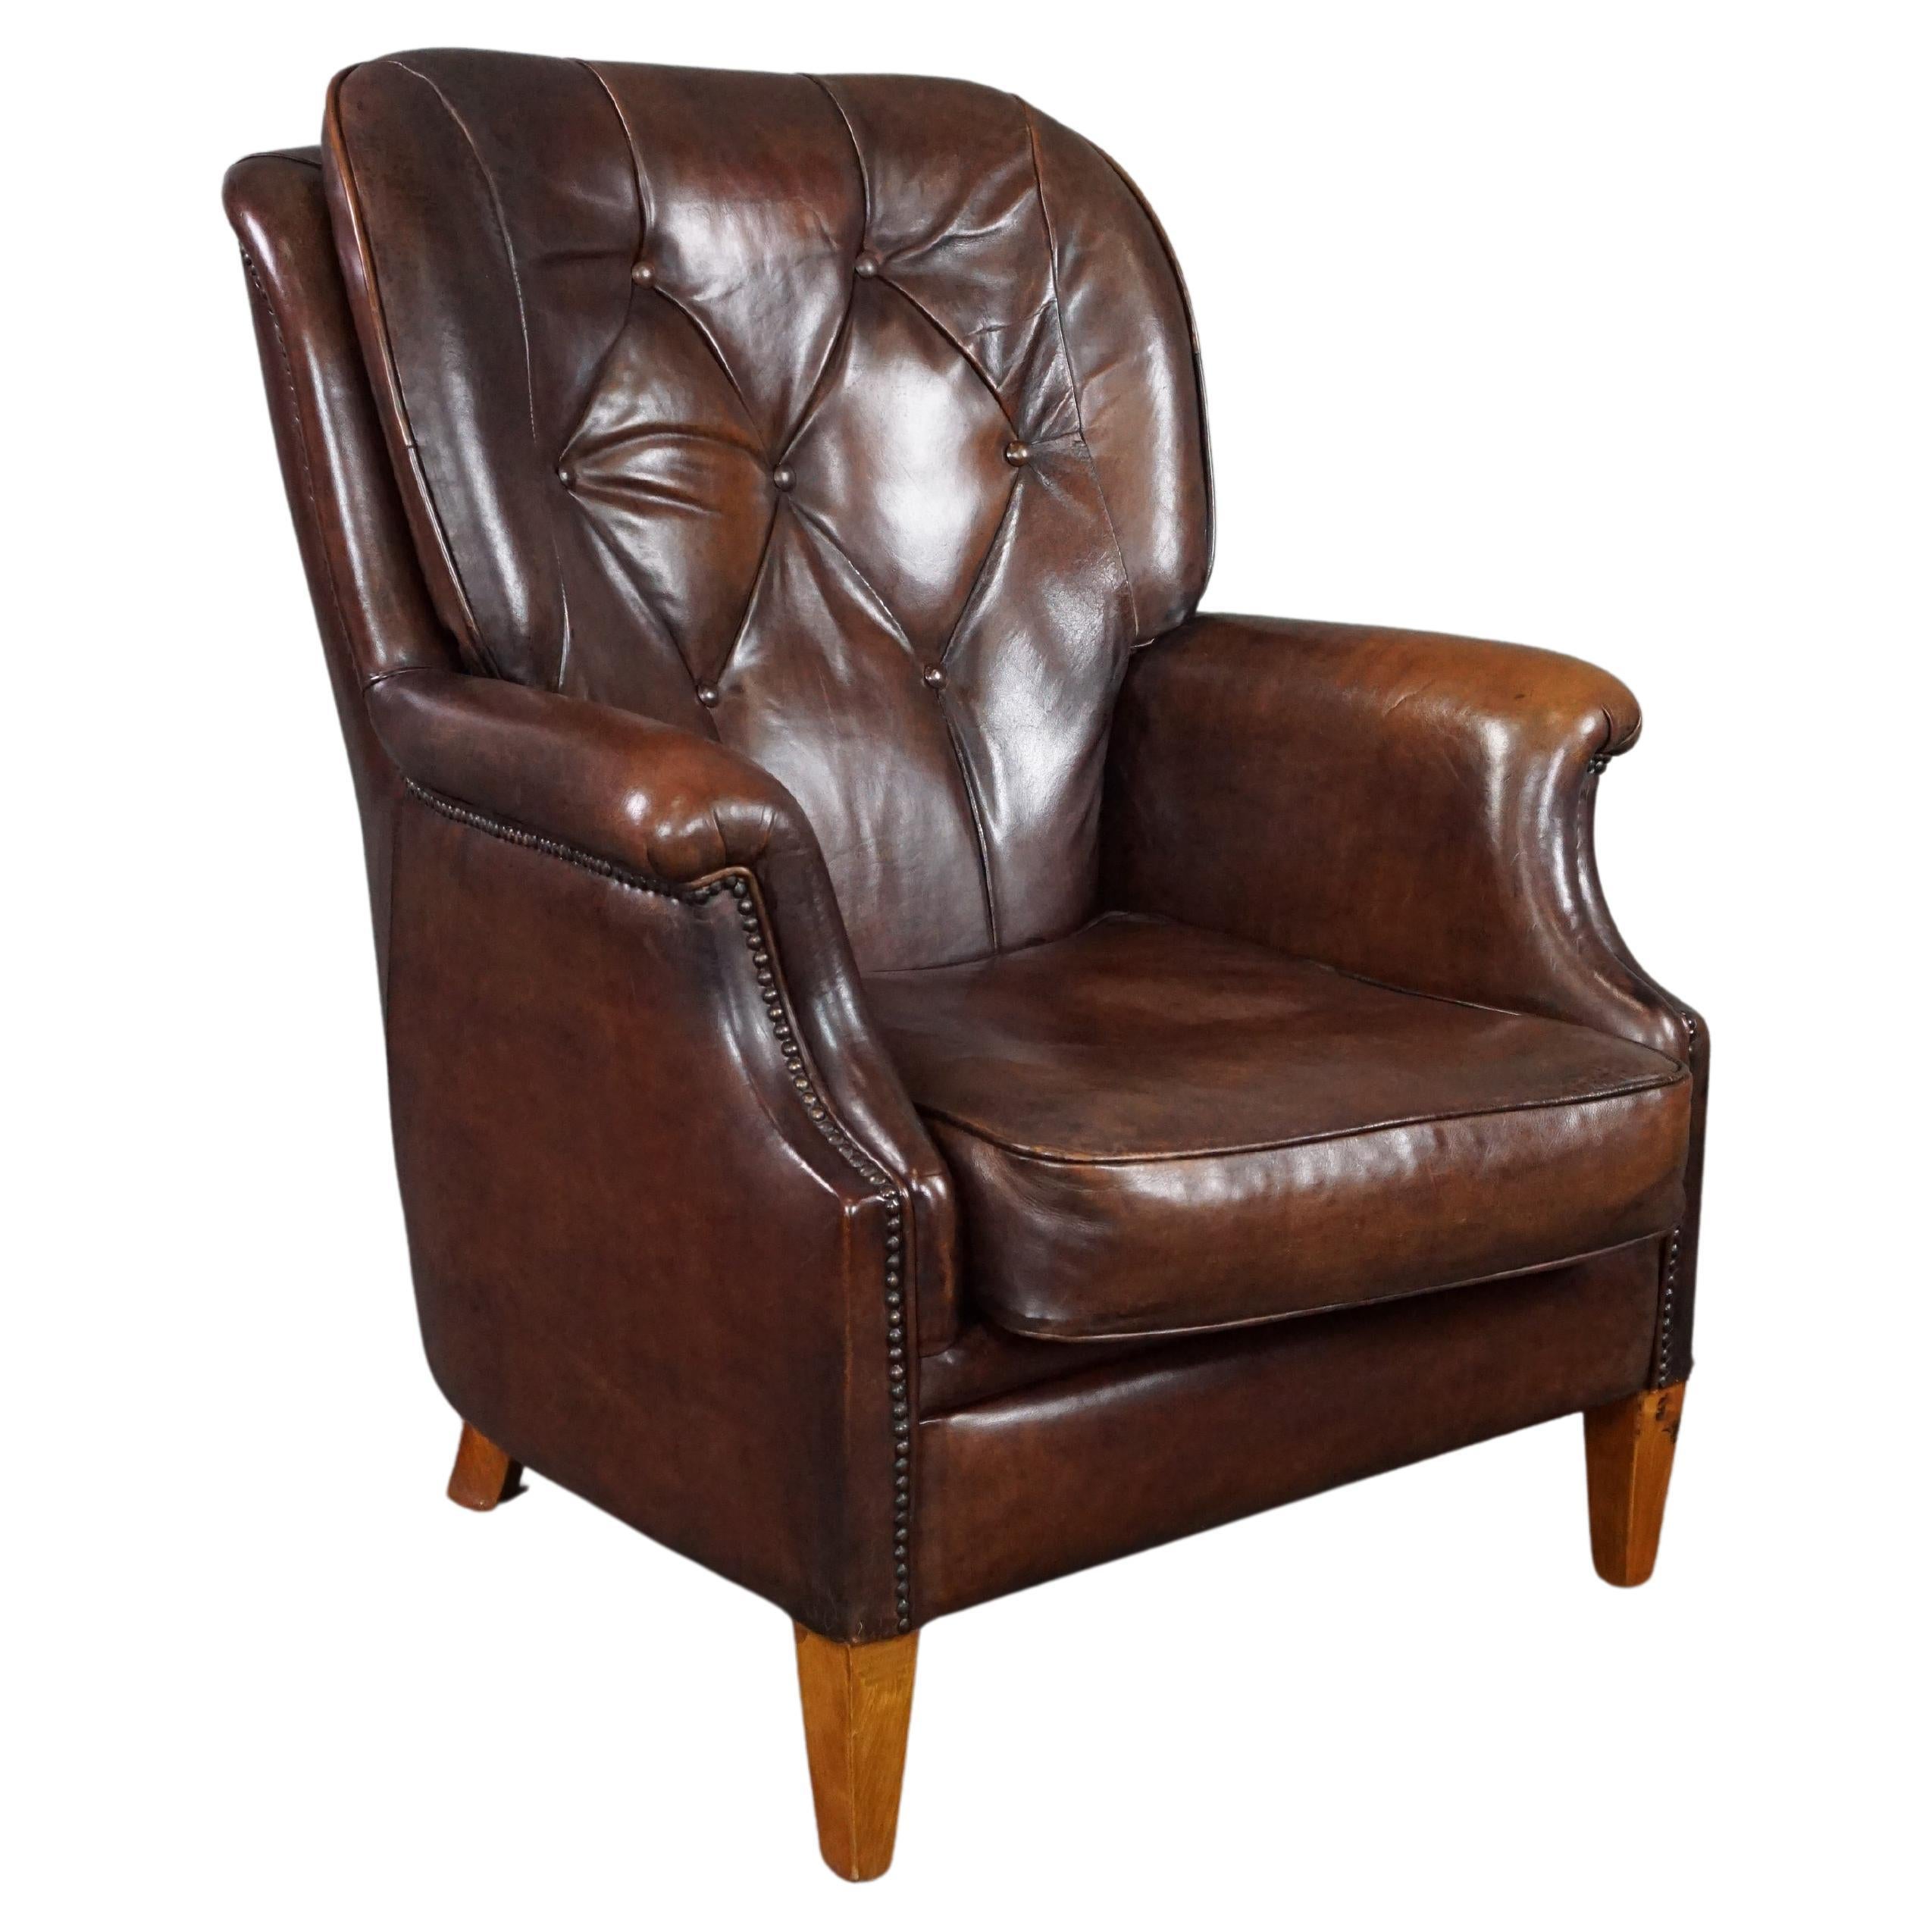 Very comfortable and beautifully colored sheep leather armchair